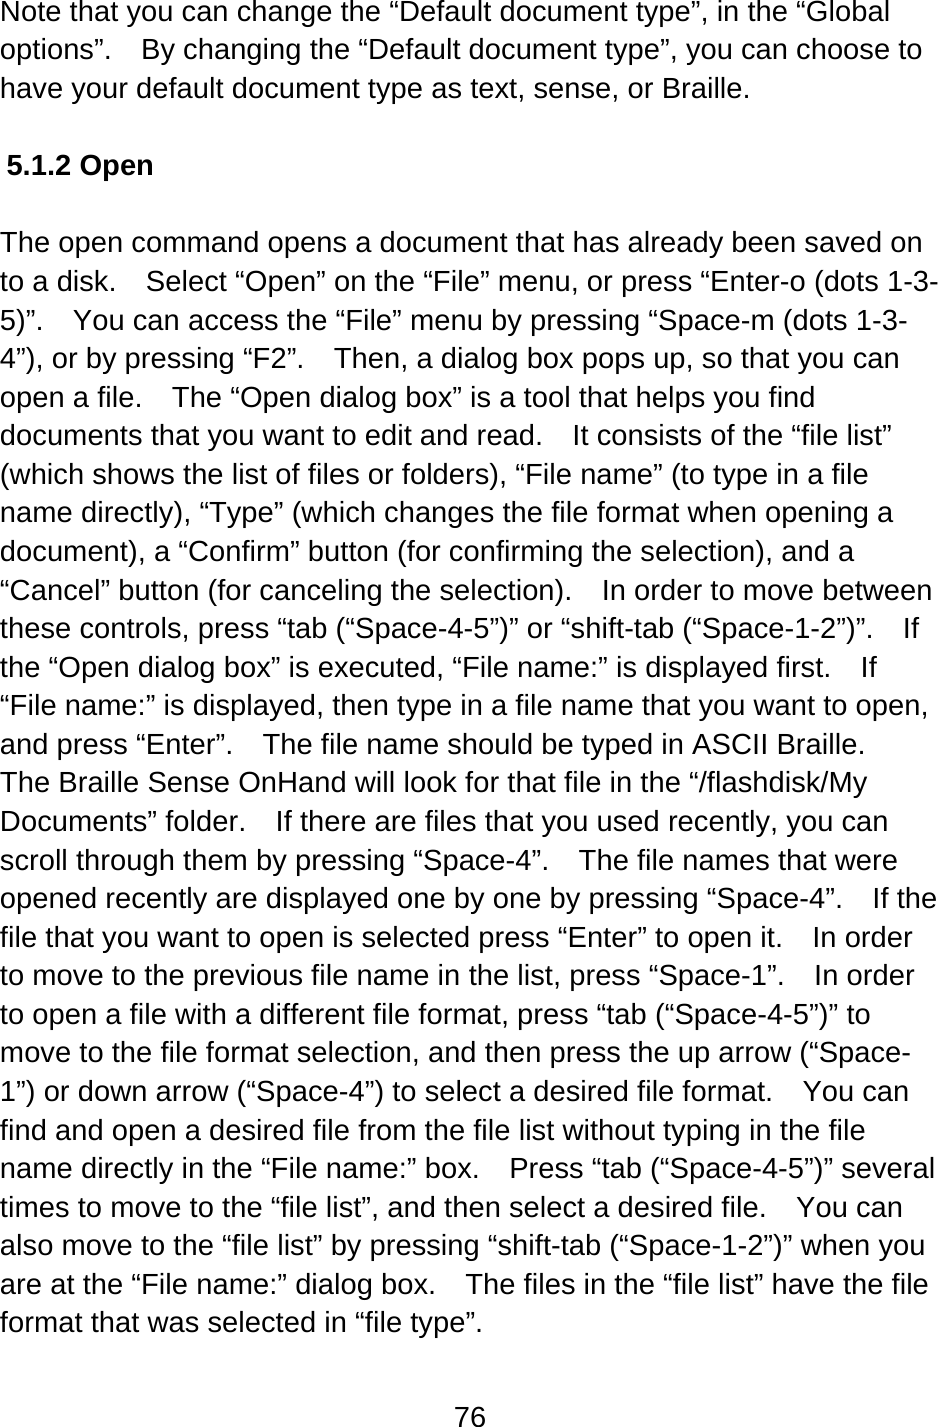 76  Note that you can change the “Default document type”, in the “Global options”.    By changing the “Default document type”, you can choose to have your default document type as text, sense, or Braille.   5.1.2 Open  The open command opens a document that has already been saved on to a disk.    Select “Open” on the “File” menu, or press “Enter-o (dots 1-3-5)”.    You can access the “File” menu by pressing “Space-m (dots 1-3-4”), or by pressing “F2”.    Then, a dialog box pops up, so that you can open a file.    The “Open dialog box” is a tool that helps you find documents that you want to edit and read.    It consists of the “file list” (which shows the list of files or folders), “File name” (to type in a file name directly), “Type” (which changes the file format when opening a document), a “Confirm” button (for confirming the selection), and a “Cancel” button (for canceling the selection).    In order to move between these controls, press “tab (“Space-4-5”)” or “shift-tab (“Space-1-2”)”.  If the “Open dialog box” is executed, “File name:” is displayed first.    If “File name:” is displayed, then type in a file name that you want to open, and press “Enter”.    The file name should be typed in ASCII Braille.   The Braille Sense OnHand will look for that file in the “/flashdisk/My Documents” folder.    If there are files that you used recently, you can scroll through them by pressing “Space-4”.    The file names that were opened recently are displayed one by one by pressing “Space-4”.    If the file that you want to open is selected press “Enter” to open it.    In order to move to the previous file name in the list, press “Space-1”.    In order to open a file with a different file format, press “tab (“Space-4-5”)” to move to the file format selection, and then press the up arrow (“Space-1”) or down arrow (“Space-4”) to select a desired file format.    You can find and open a desired file from the file list without typing in the file name directly in the “File name:” box.  Press “tab (“Space-4-5”)” several times to move to the “file list”, and then select a desired file.    You can also move to the “file list” by pressing “shift-tab (“Space-1-2”)” when you are at the “File name:” dialog box.    The files in the “file list” have the file format that was selected in “file type”.  